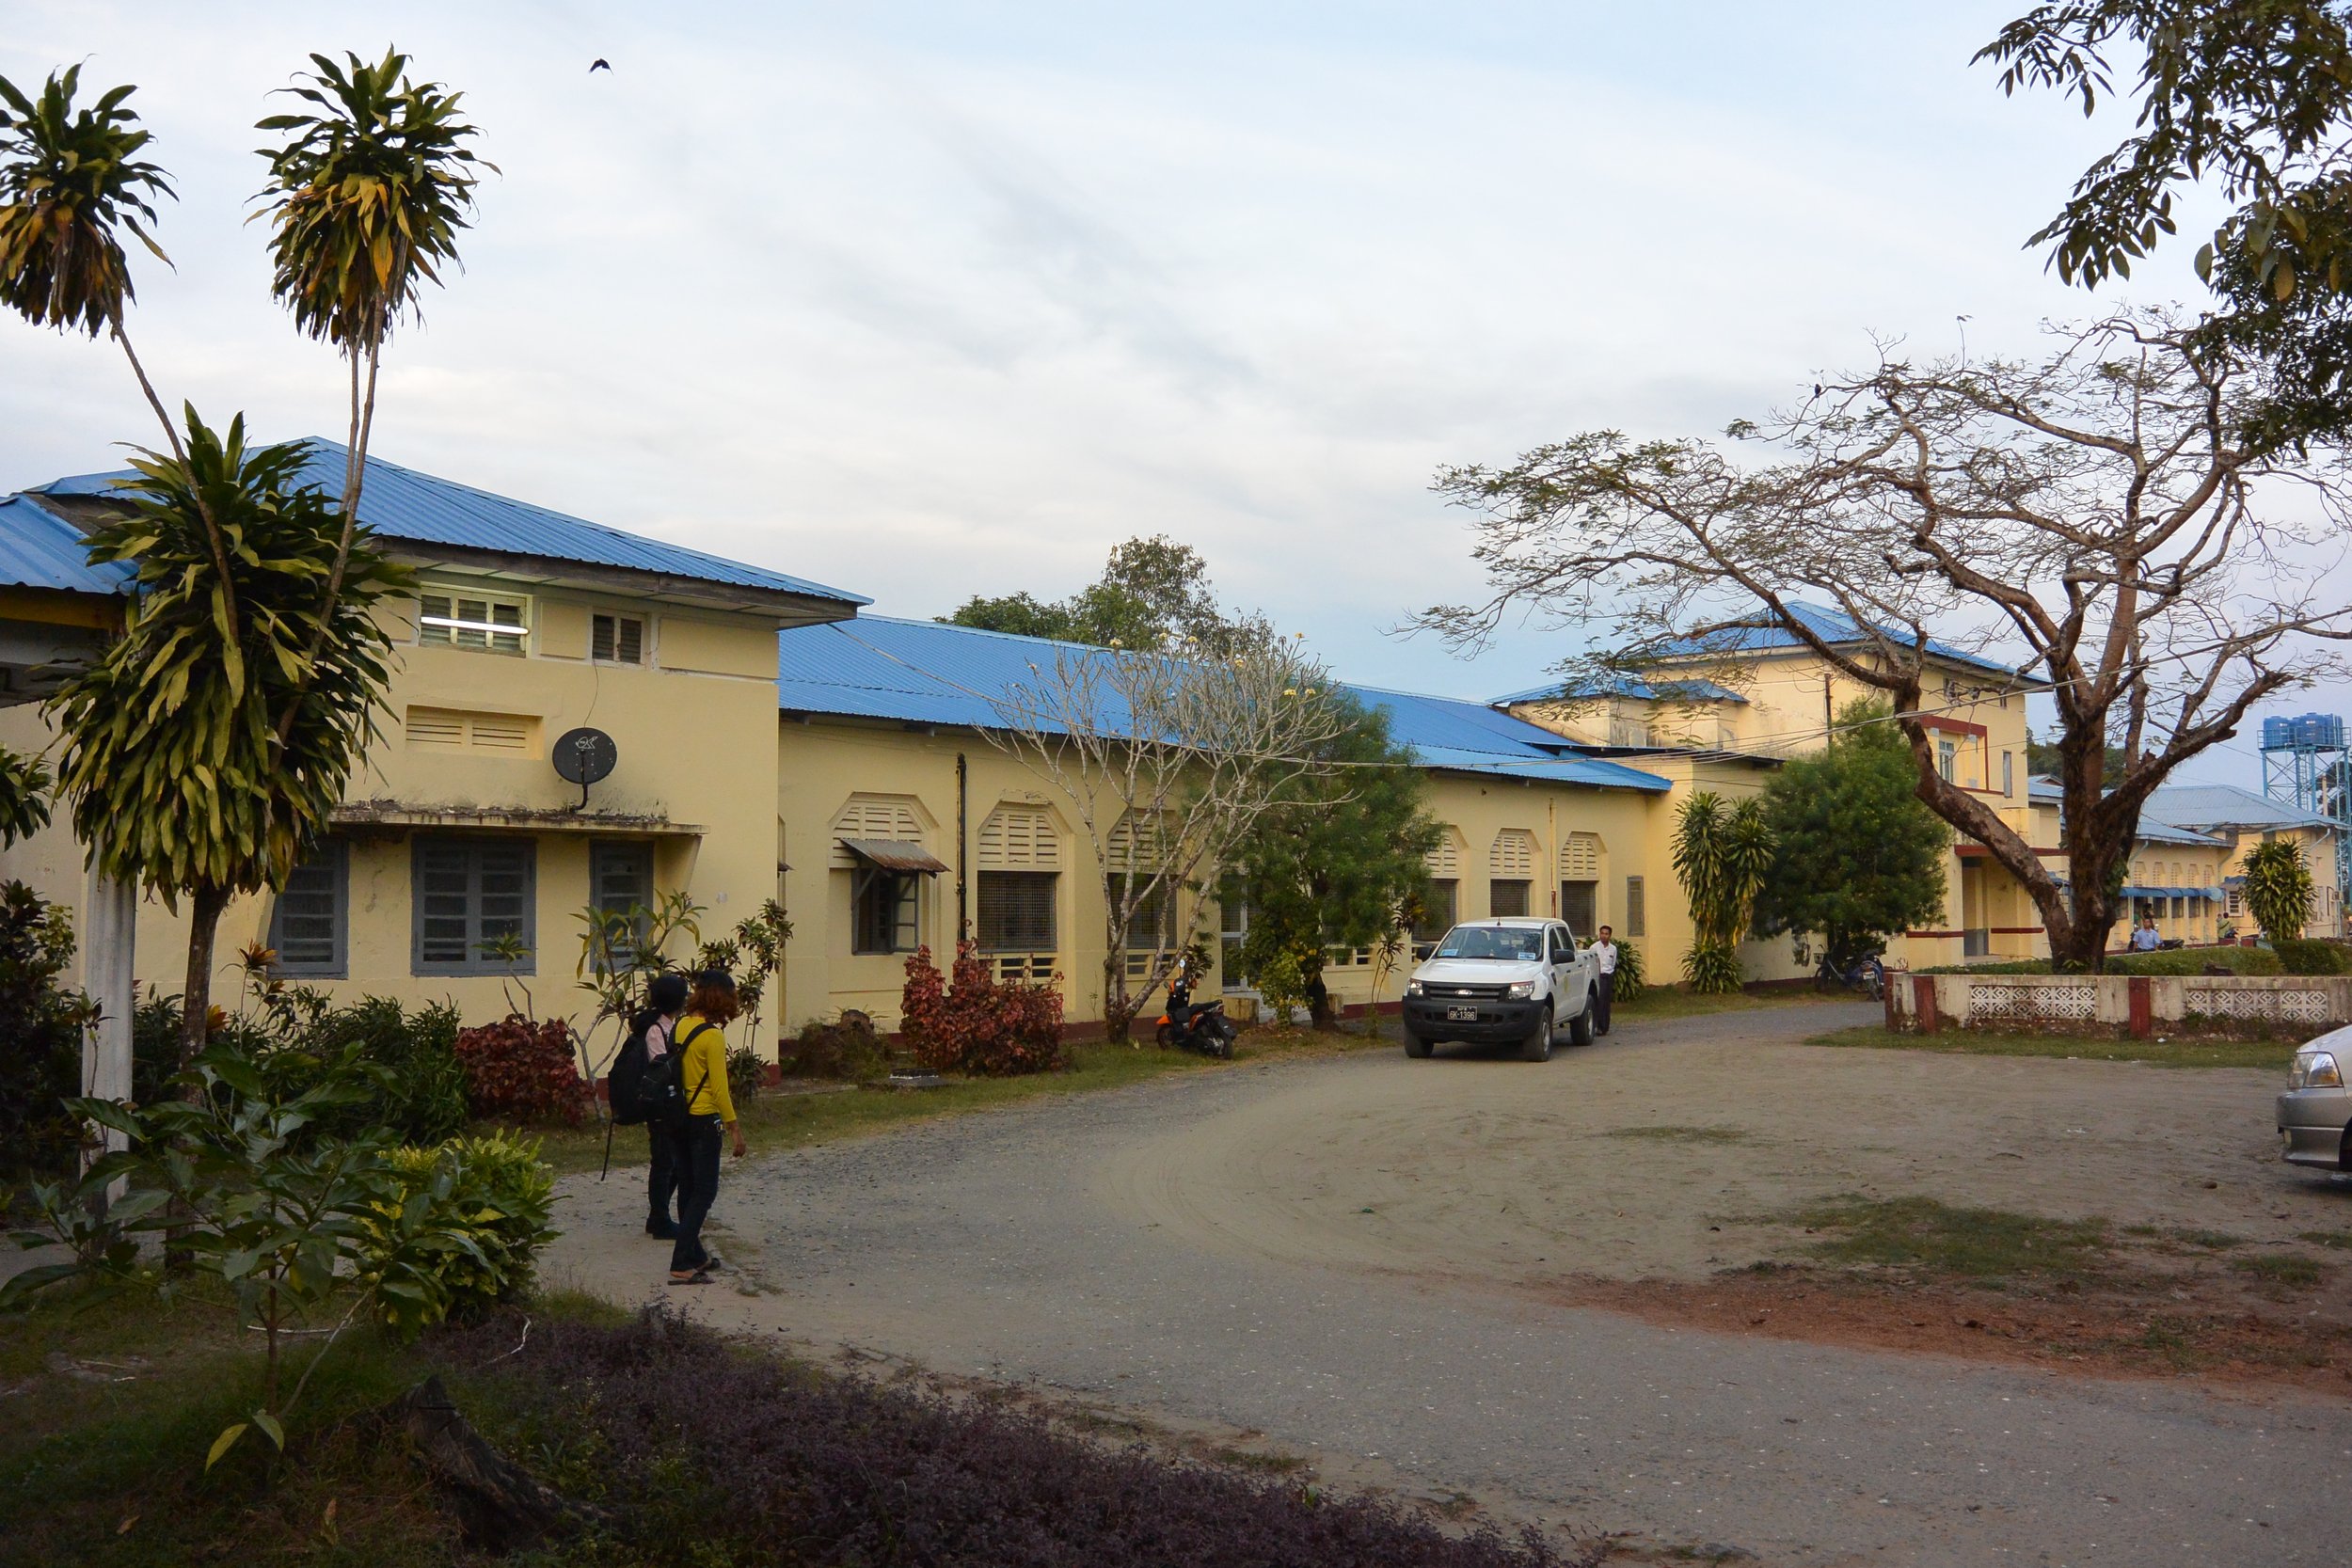 Existing main building and outpatient department